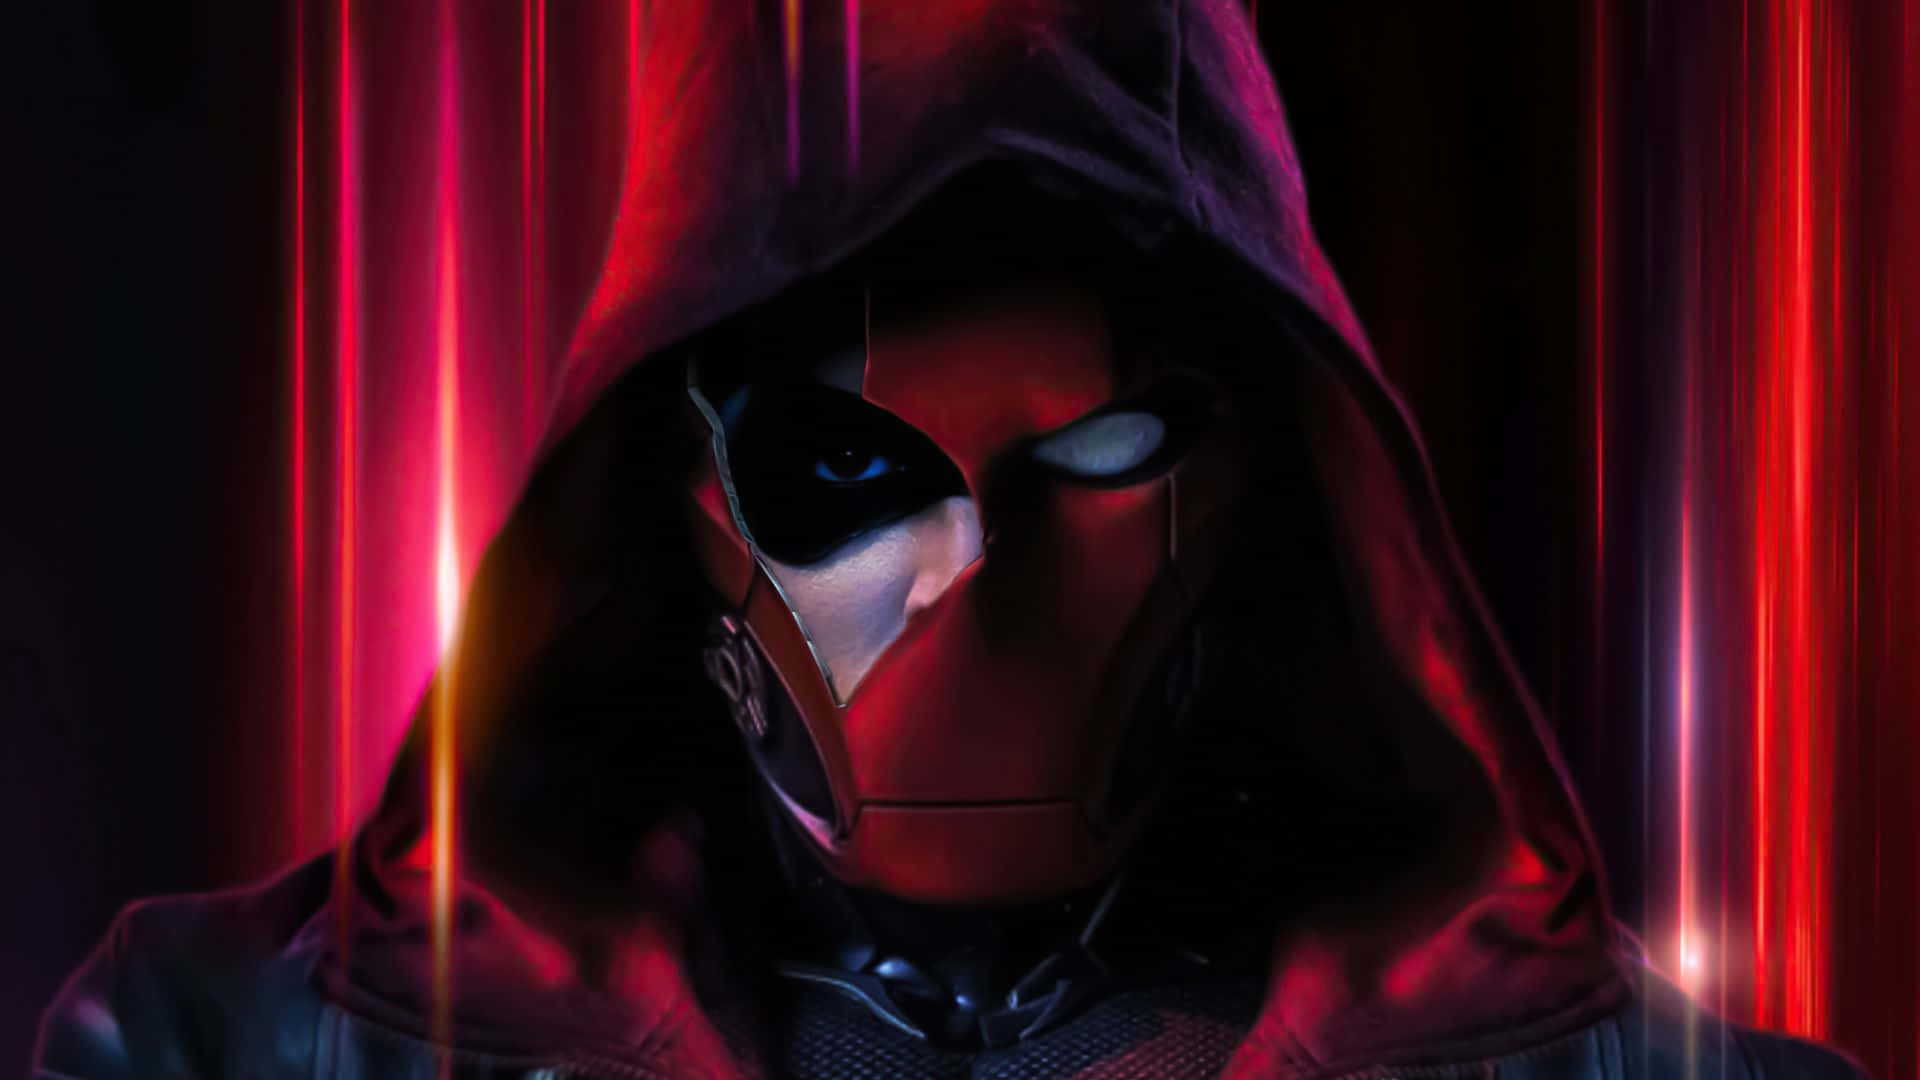 "The Hooded Outlaw Red Hood Brings Justice to Gotham"